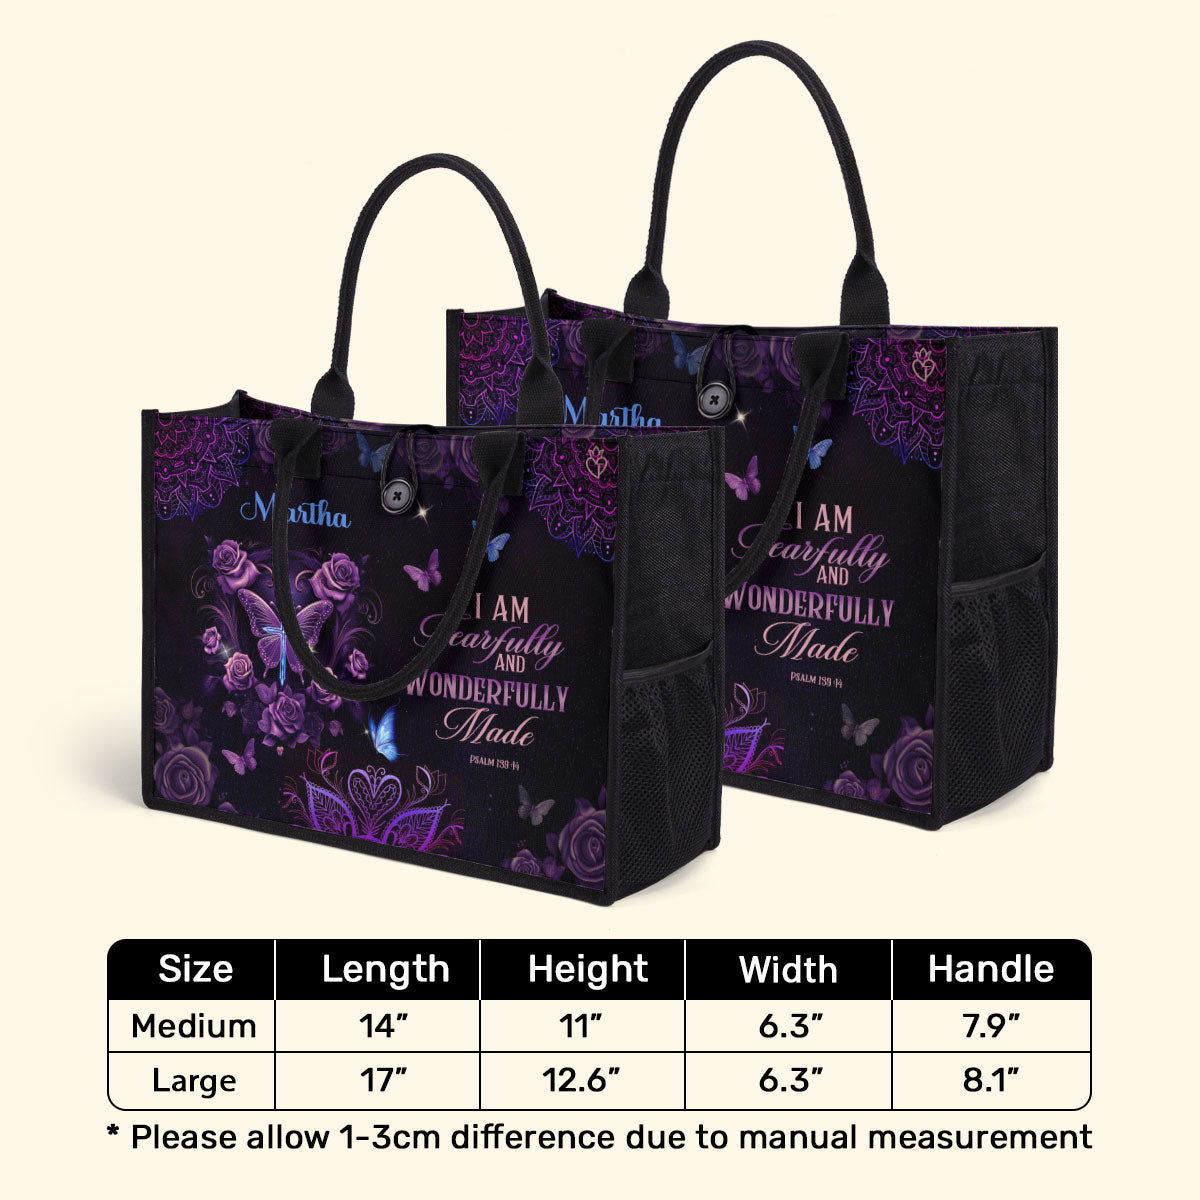 Fearfully And Wonderfully Made - Personalized Canvas Tote Bag TCVM10